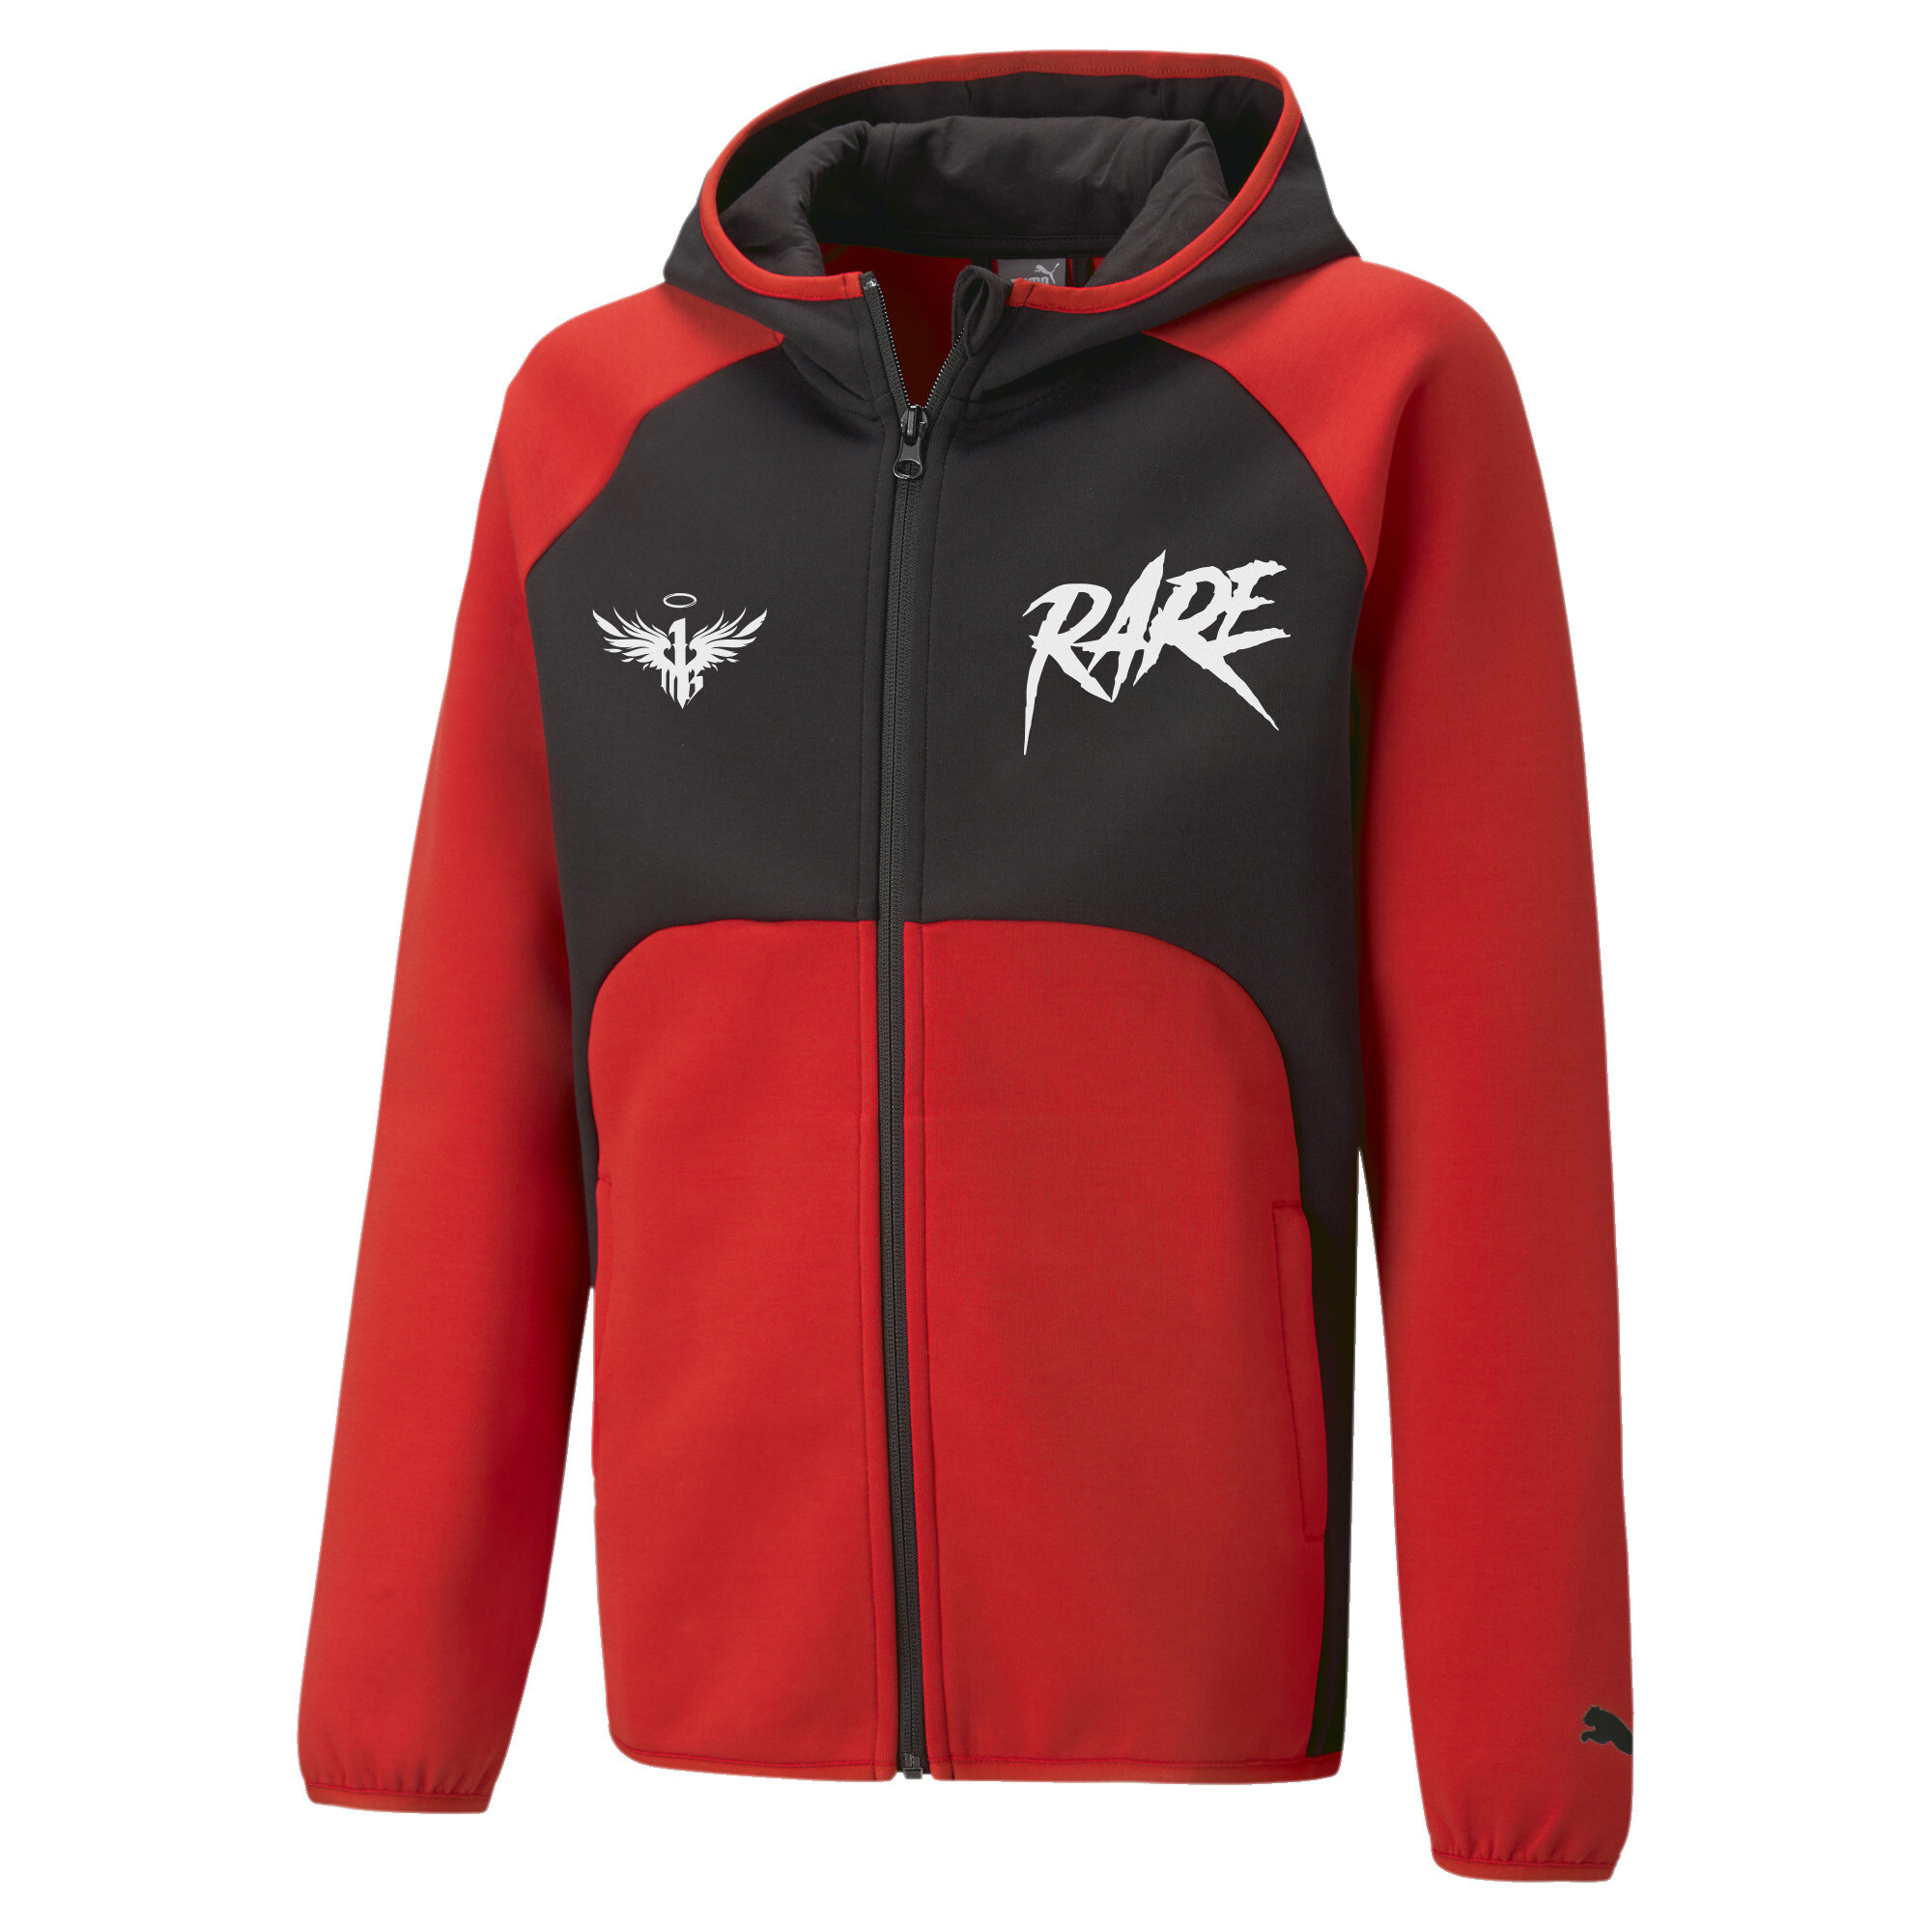 PUMA X MELO Dime Jacket In Red, Size 7-8 Youth